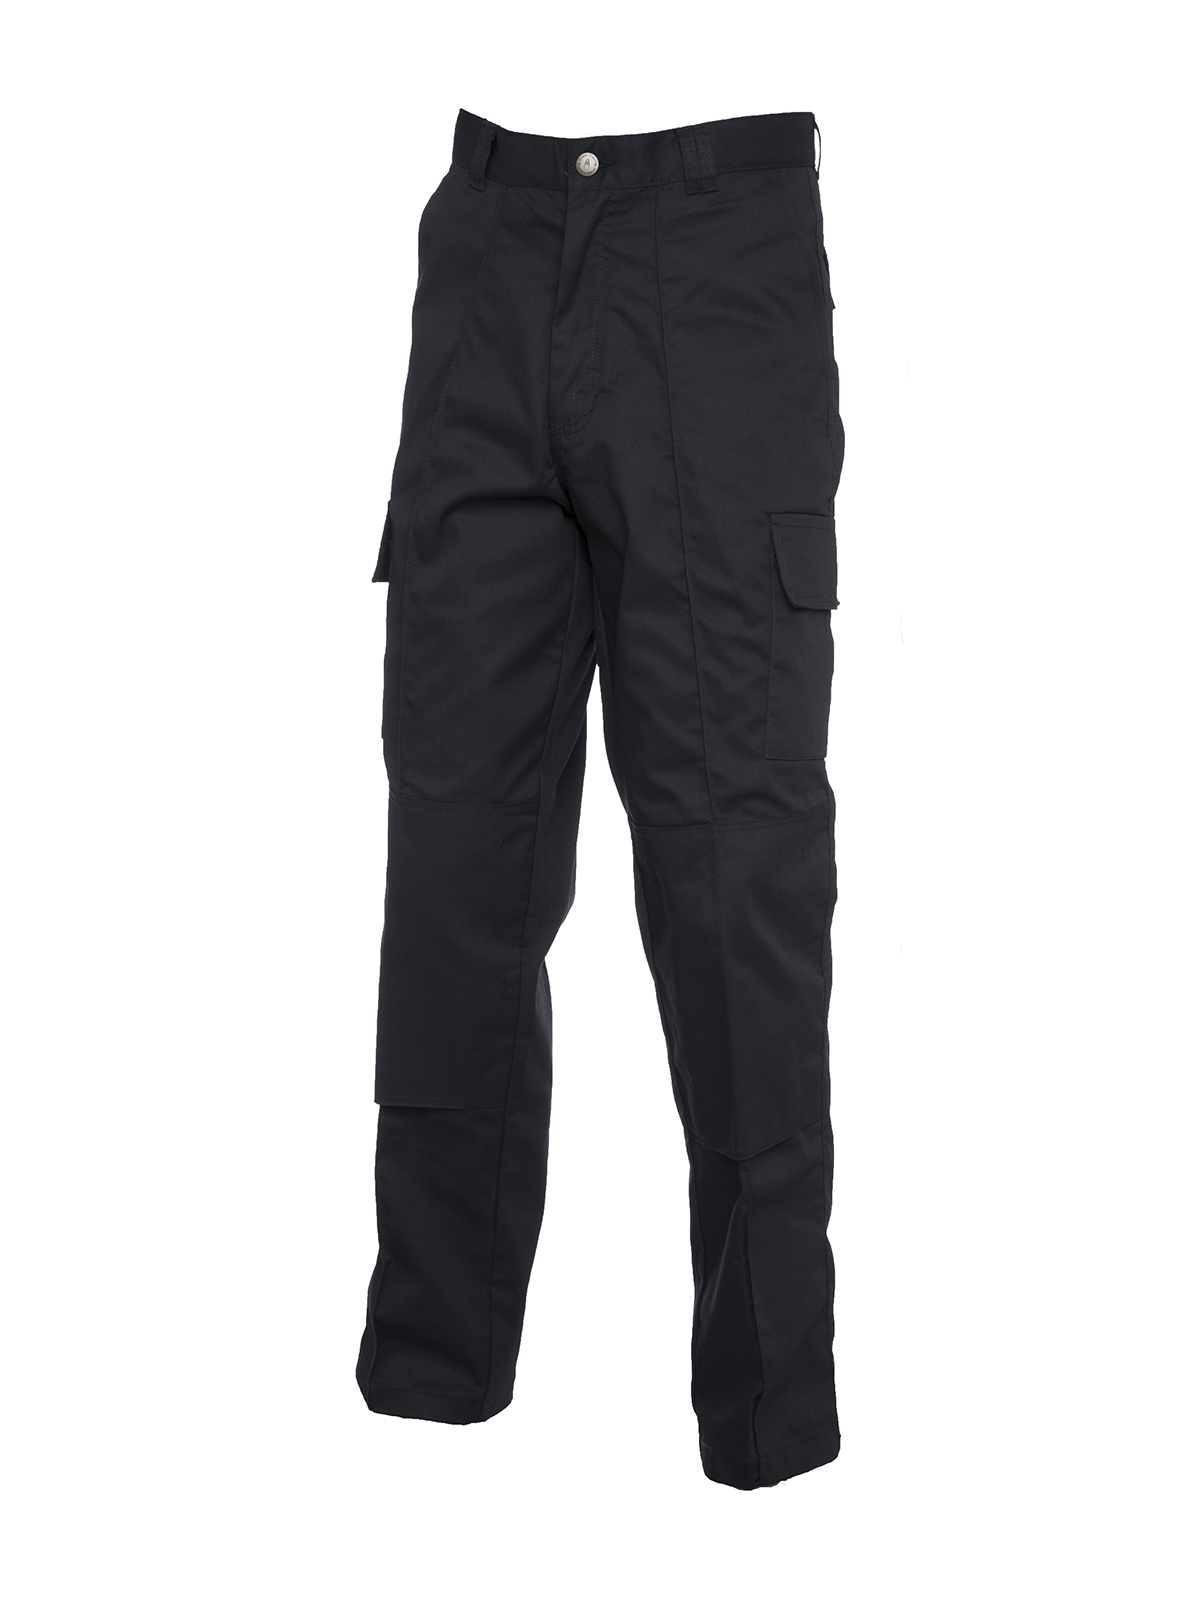 Cargo Trouser with Knee Pad Pockets Regular-Uneek Clothing